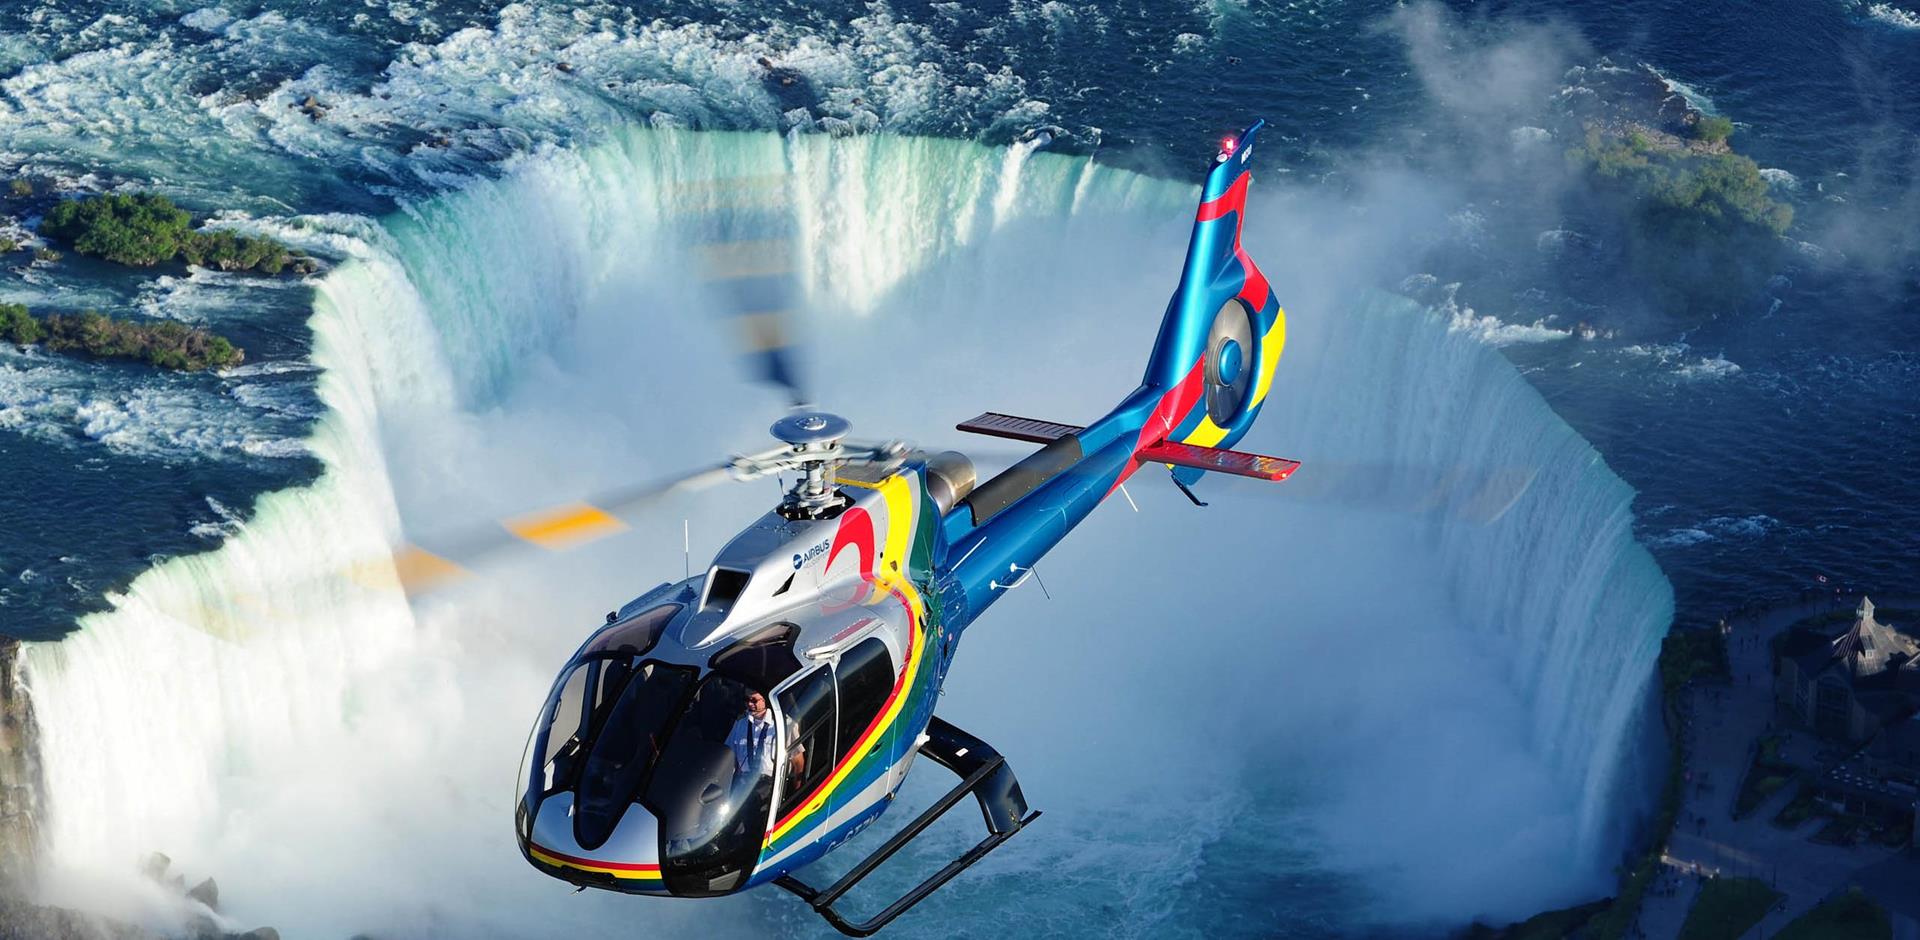 Discover Niagara by helicopter